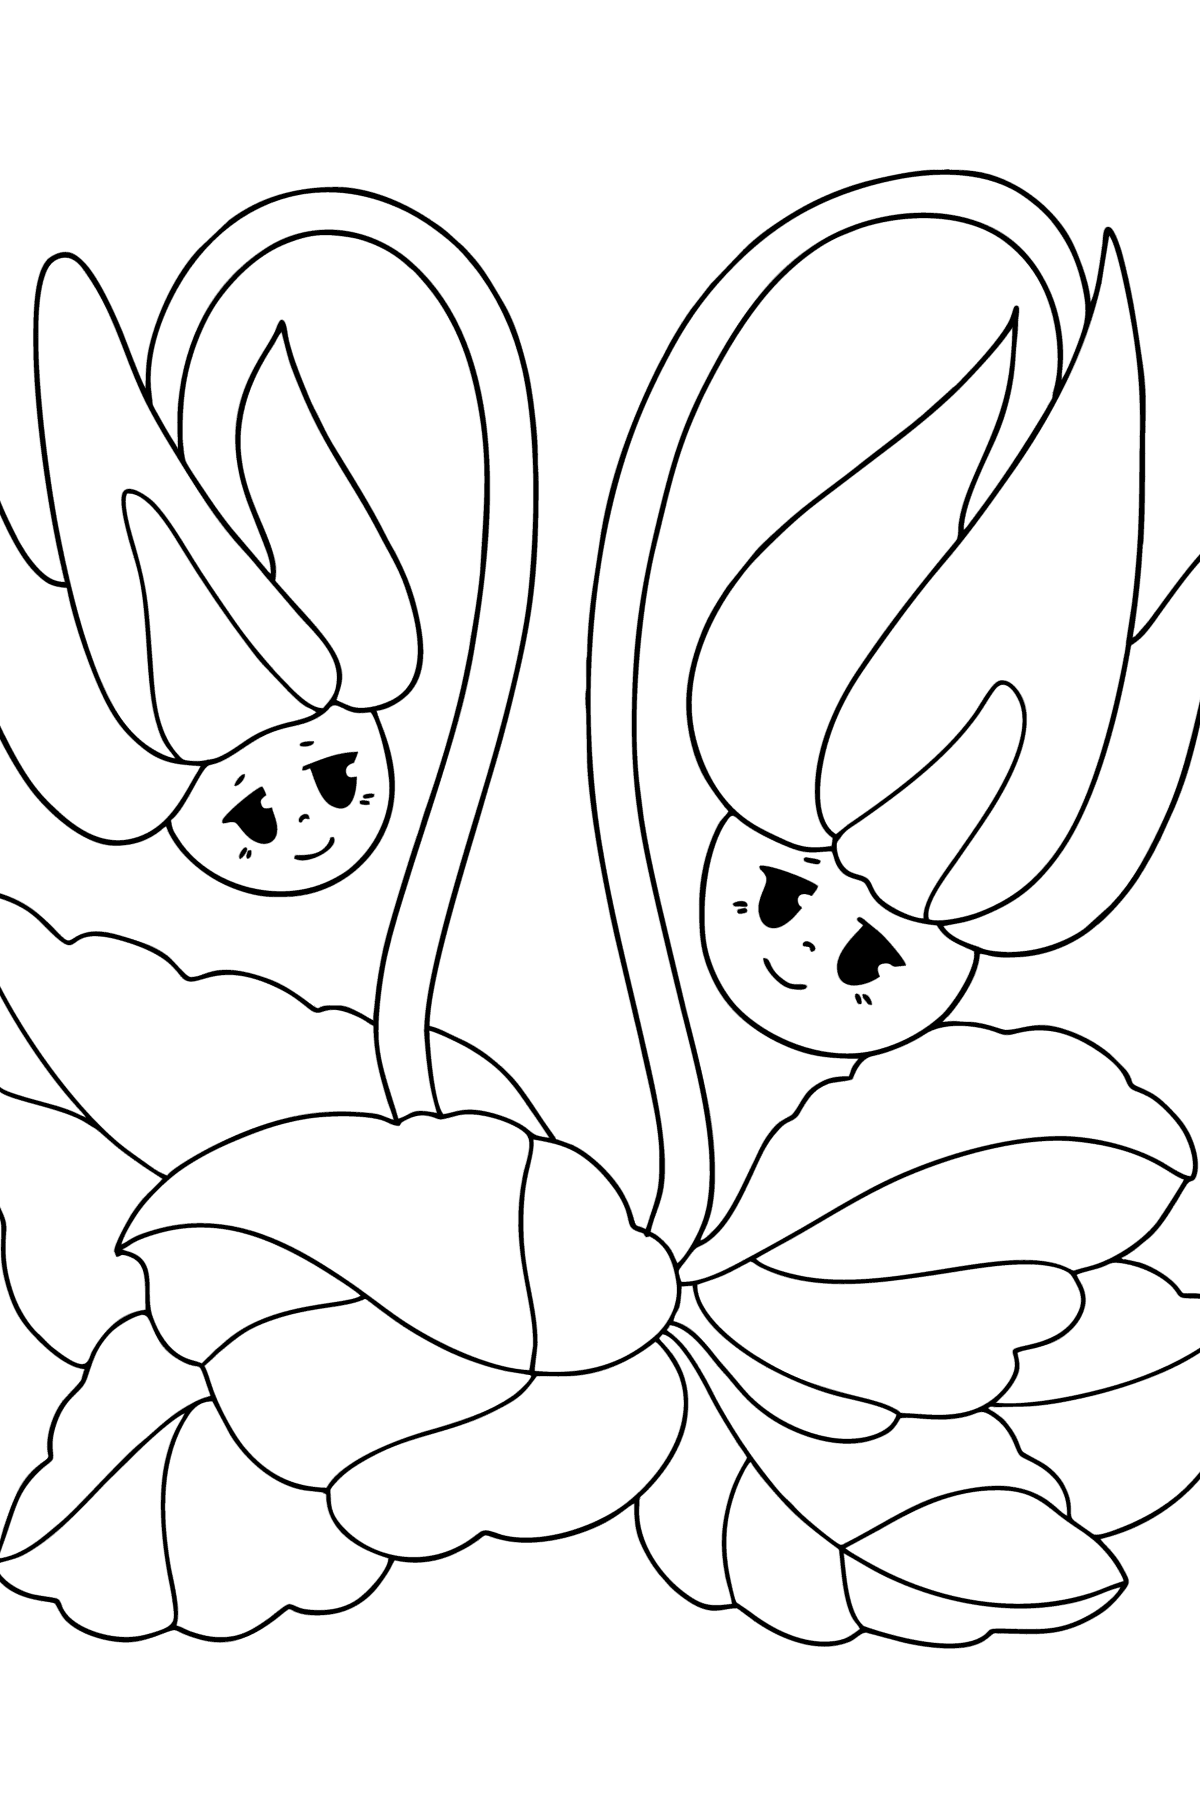 Cyclamen with eyes coloring page - Coloring Pages for Kids